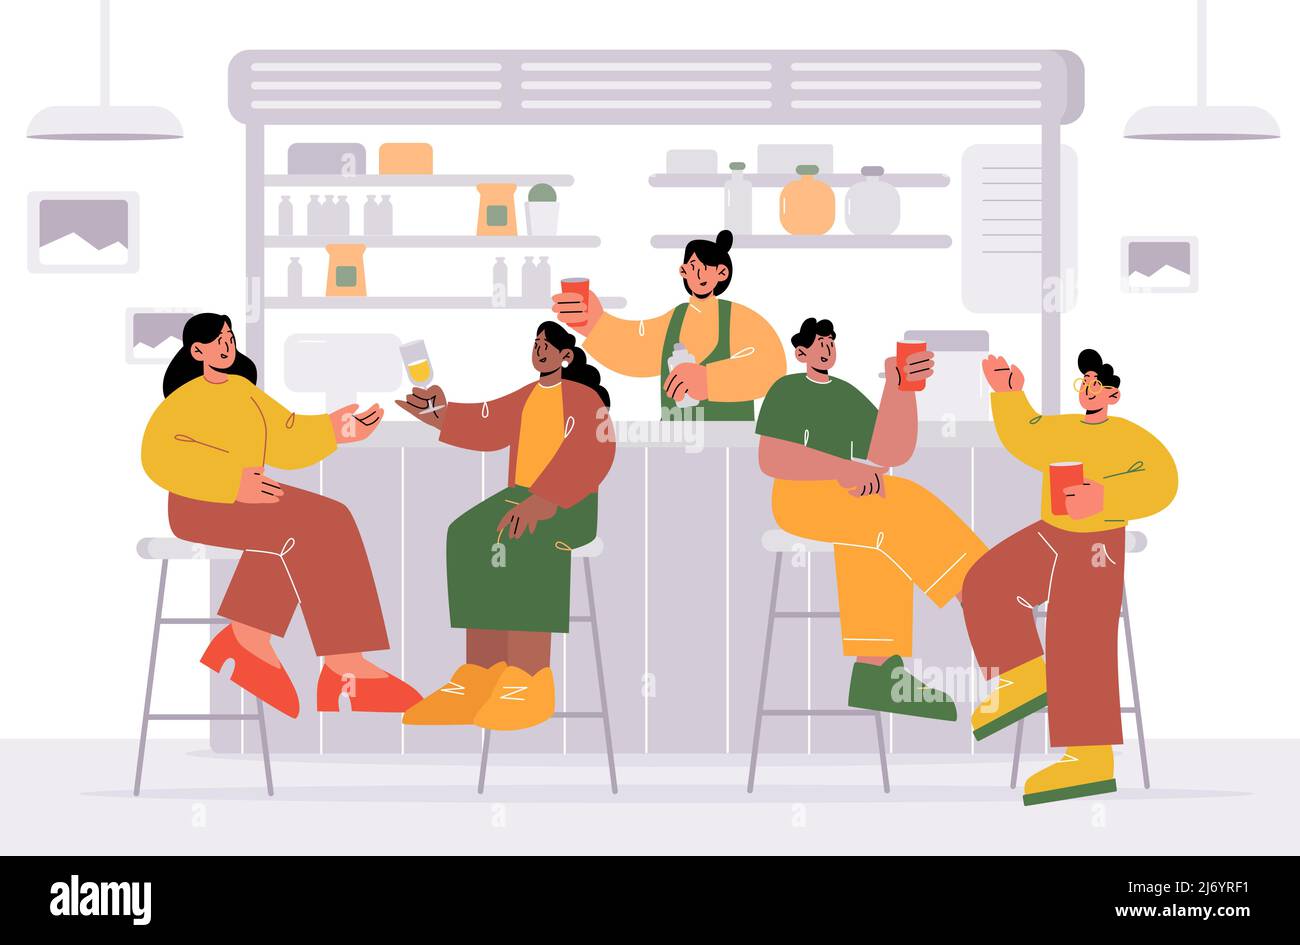 Diverse people sitting on stools in bar or pub. Vector flat illustration of cafe or restaurant interior with bar counter, shelves with bottles, happy men and women with drinks and bartender girl Stock Vector